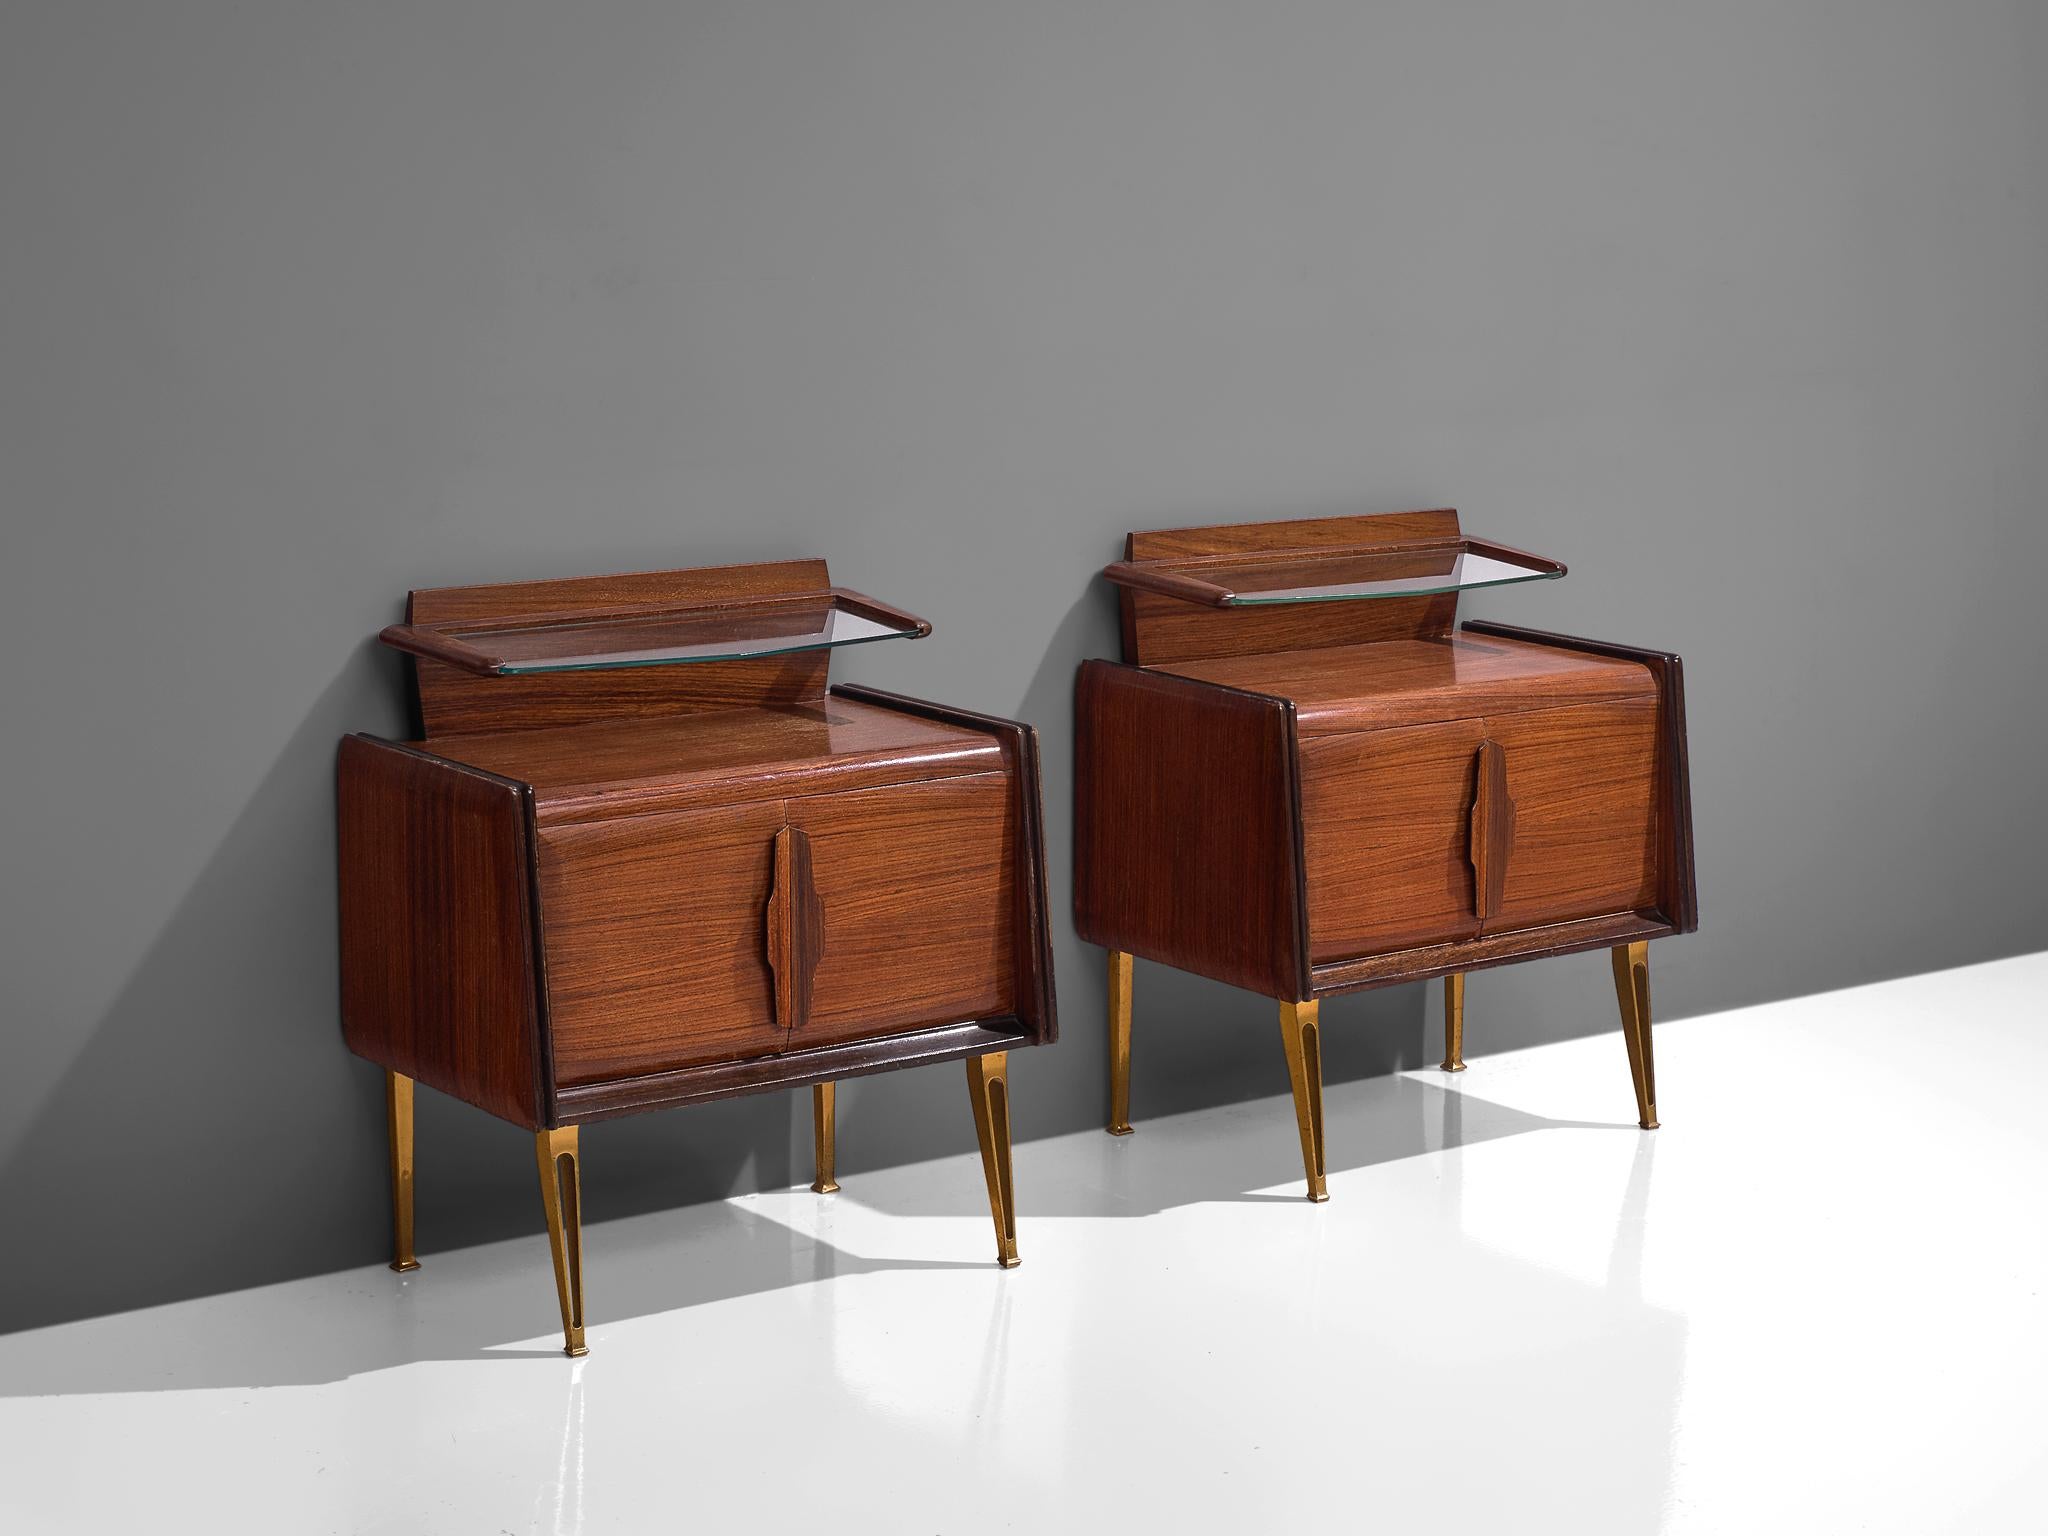 Pair of night stands, teak, glass and brass, Italy, 1960s.

These two side tables or nightstands are both refined and elegant in every way. The glass top floats above the small cabinet. Executed with double doors with sculptural handles. The brass